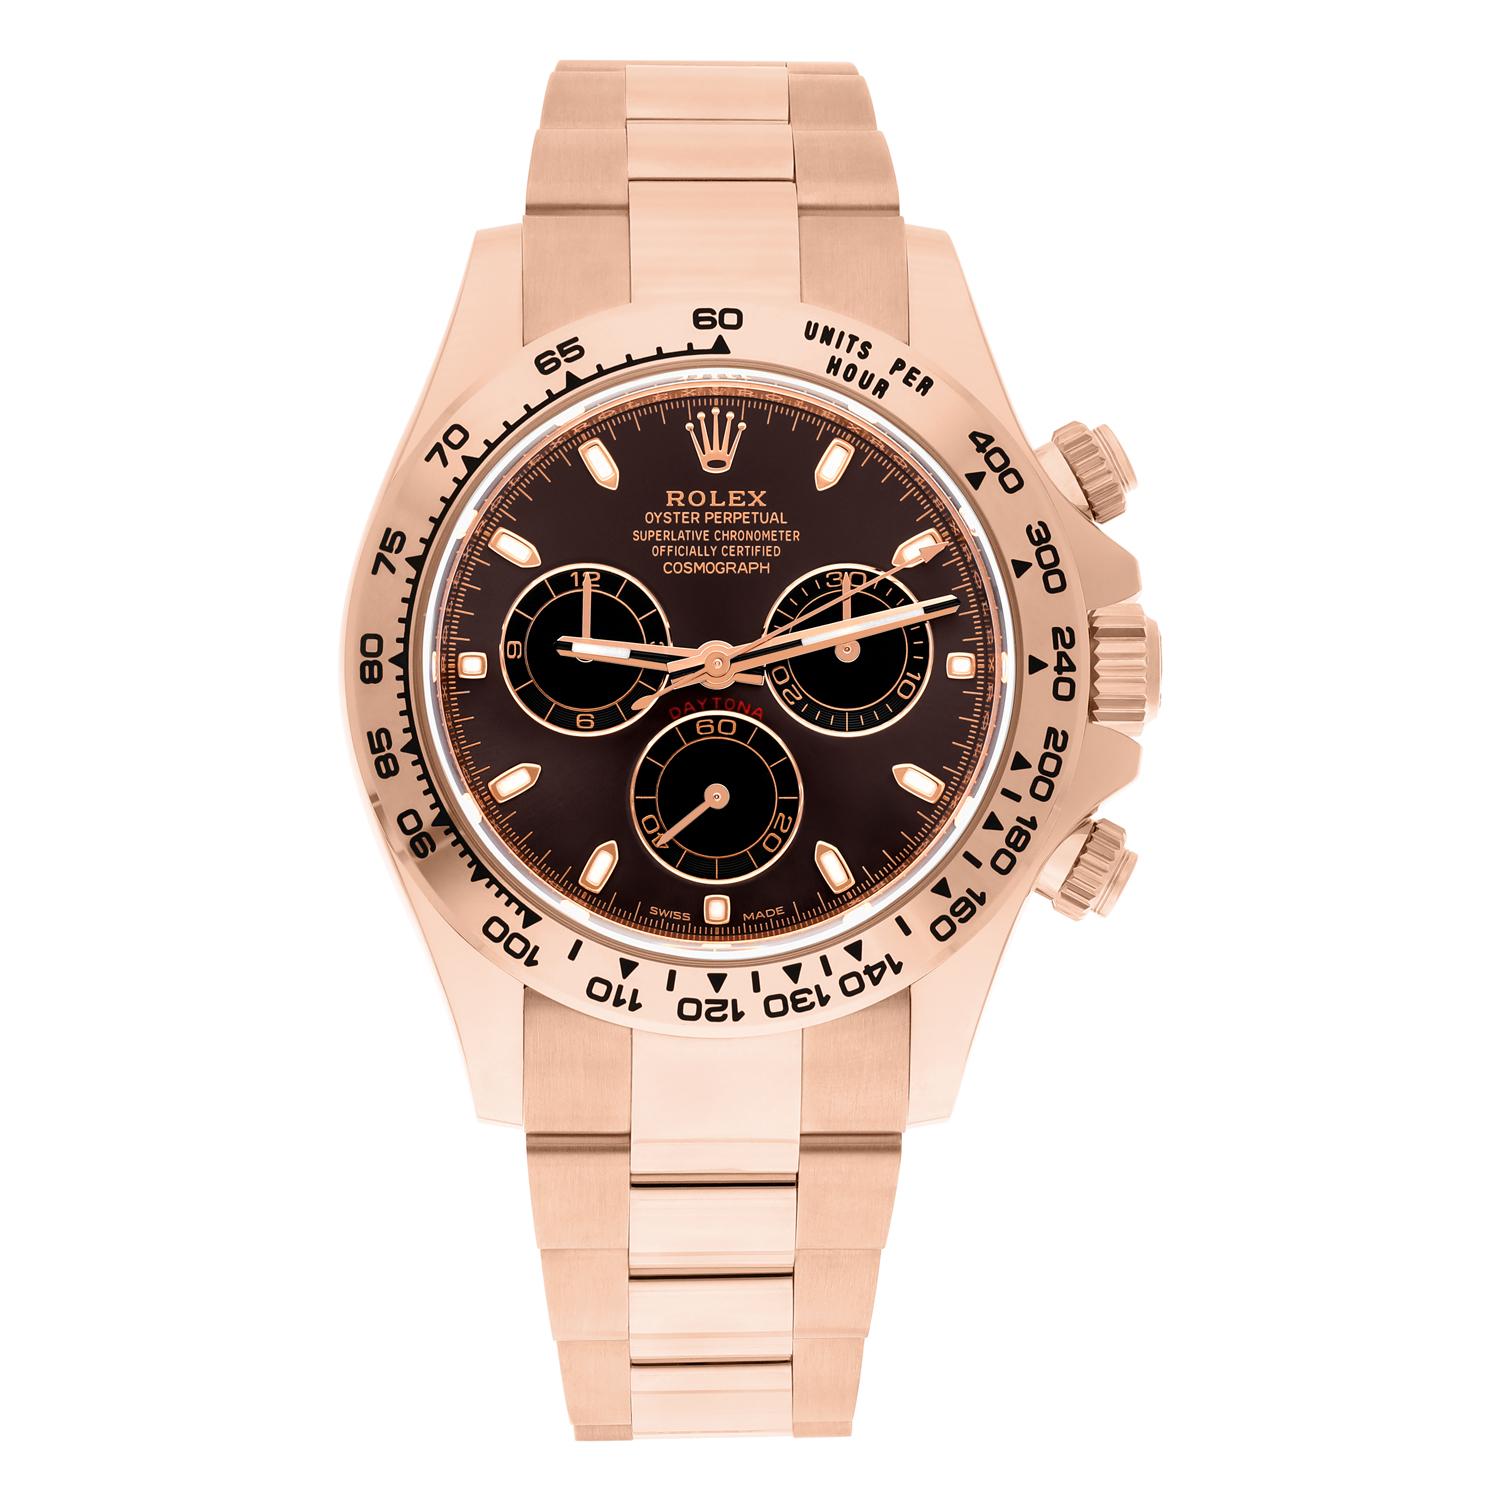 Complete with its original Rolex box, booklets, swing tags and warranty card. Under Rolex warranty until April 2027. This 116505 Daytona looks absolutely magnificent in 18ct Everose gold with discontinued chocolate brown dial, one of the most